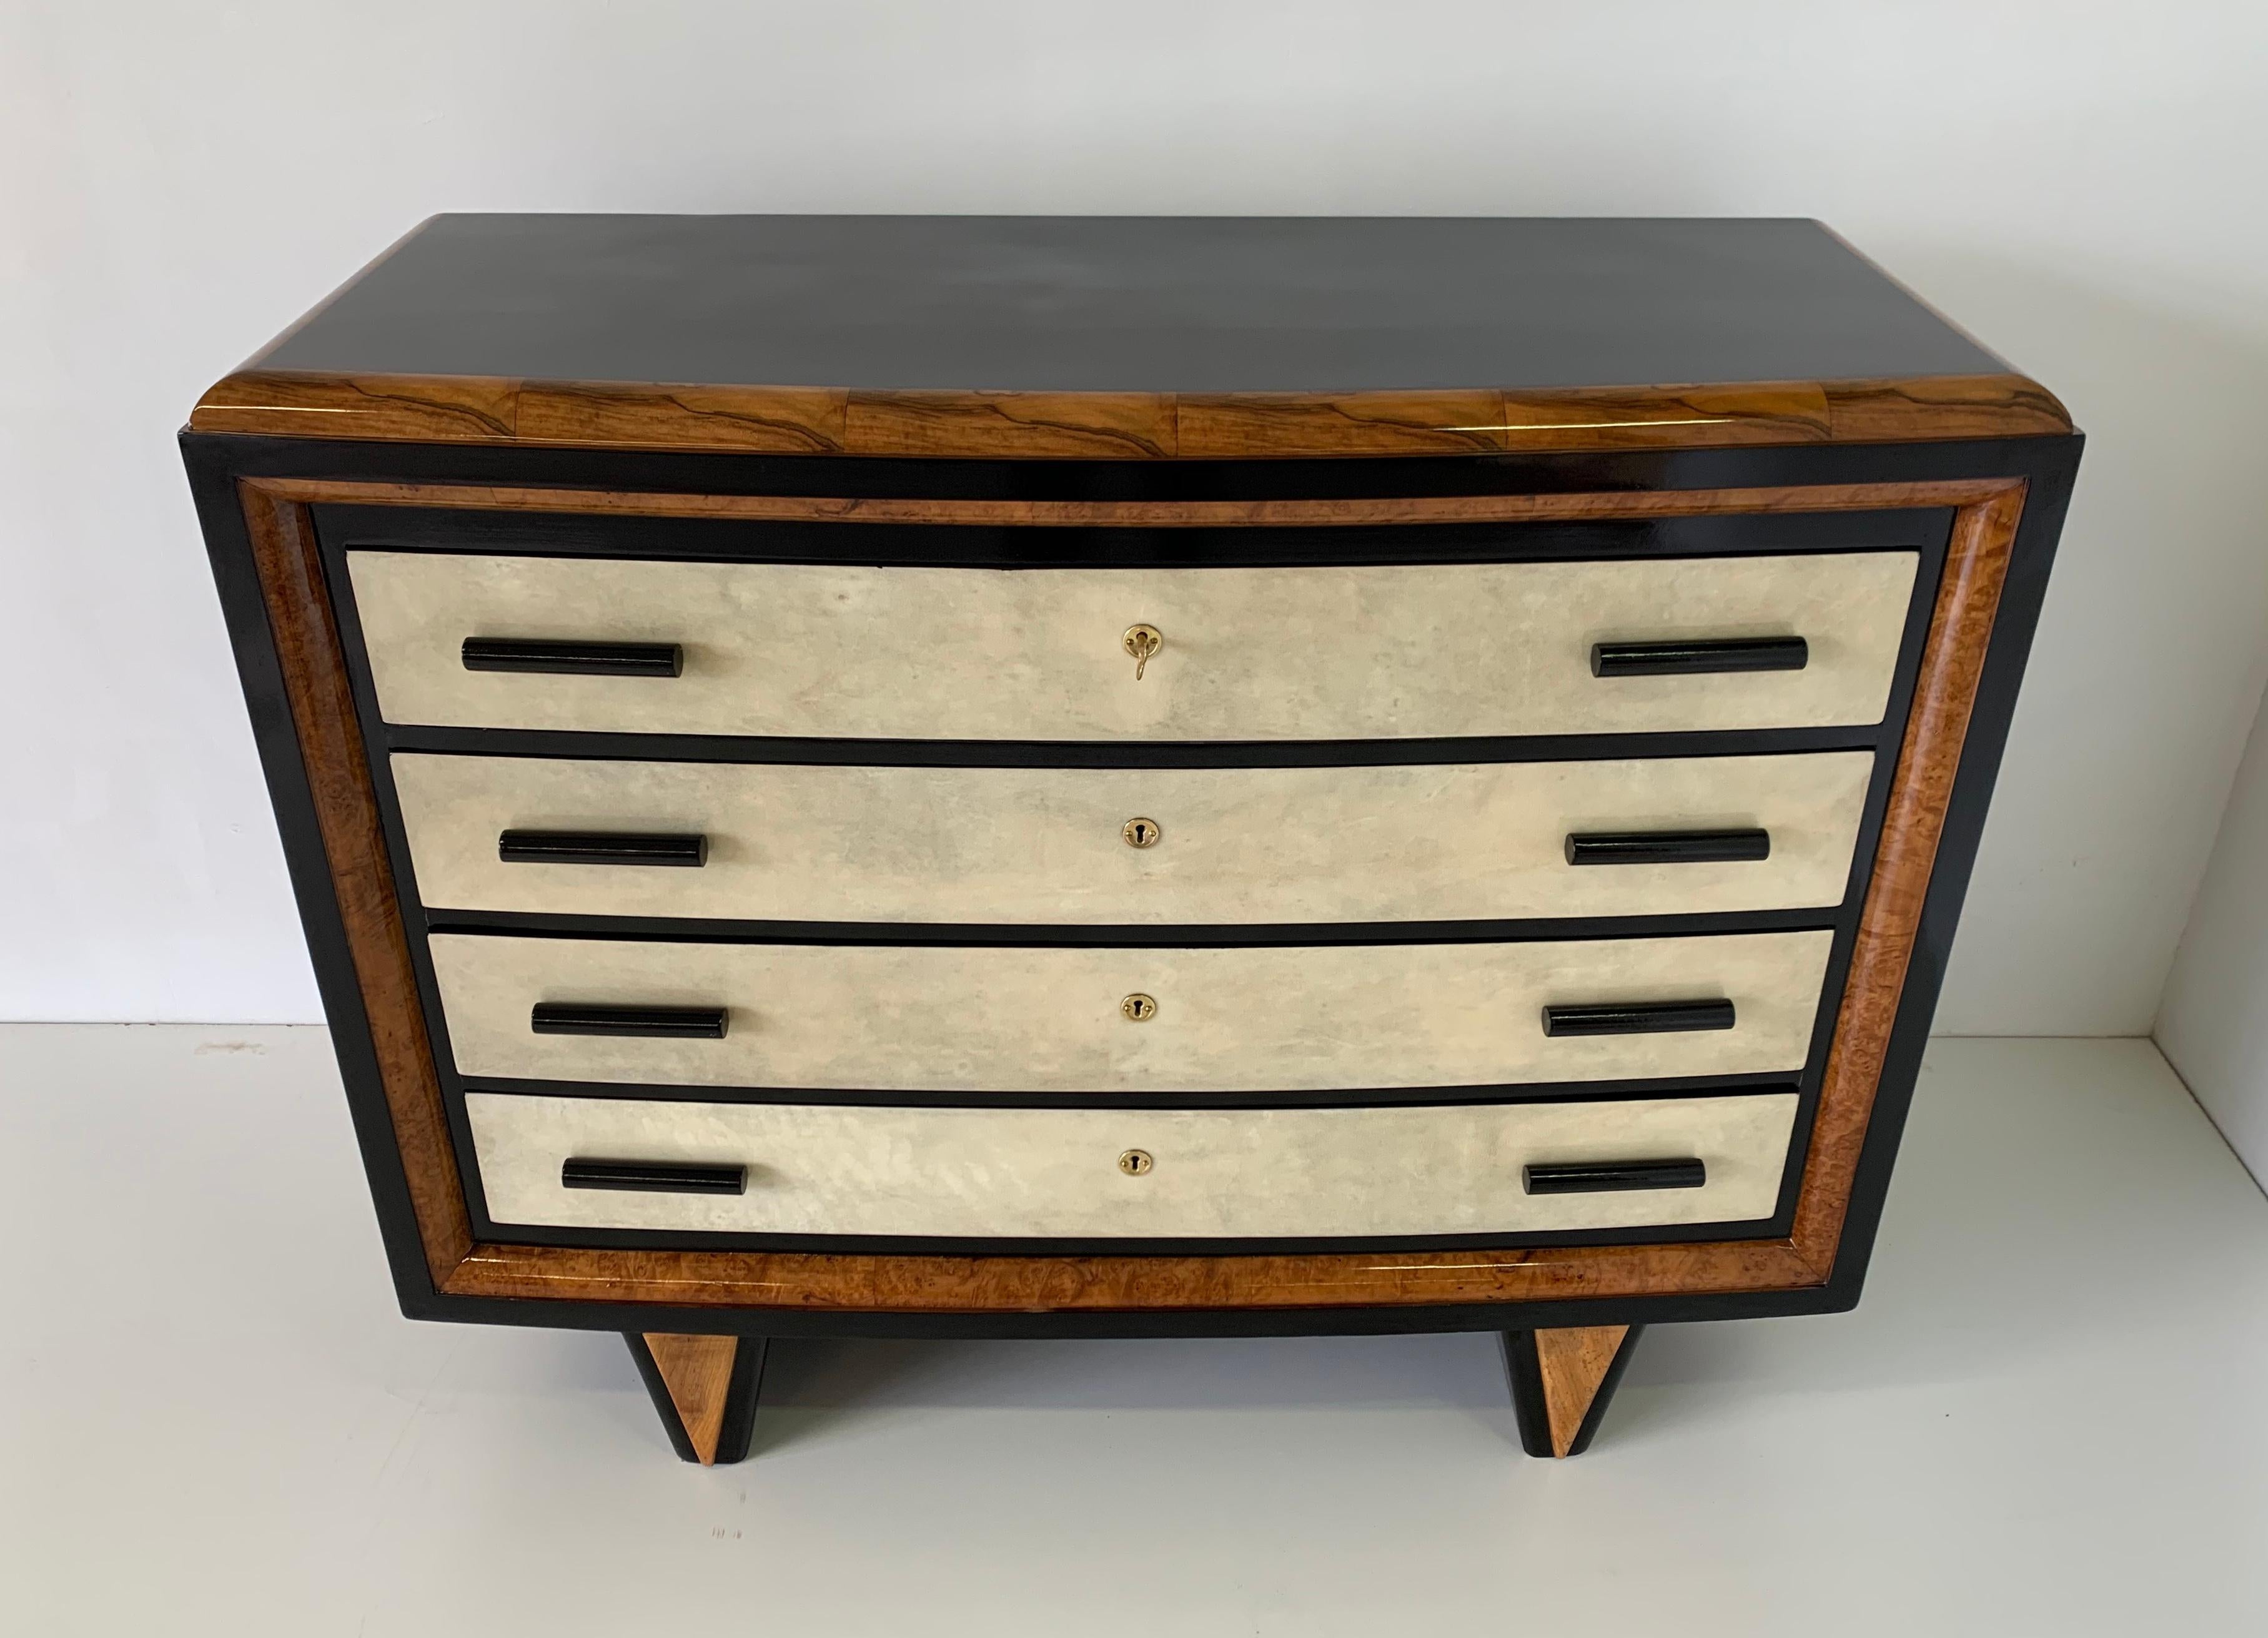 Italian dresser from the 1930s produced in Italy.
The front of the drawers are in parchment while the profiles are in walnut.
The structure and handles are in black lacquered wood.
Metal parts in brass.
Completely restored. 
   